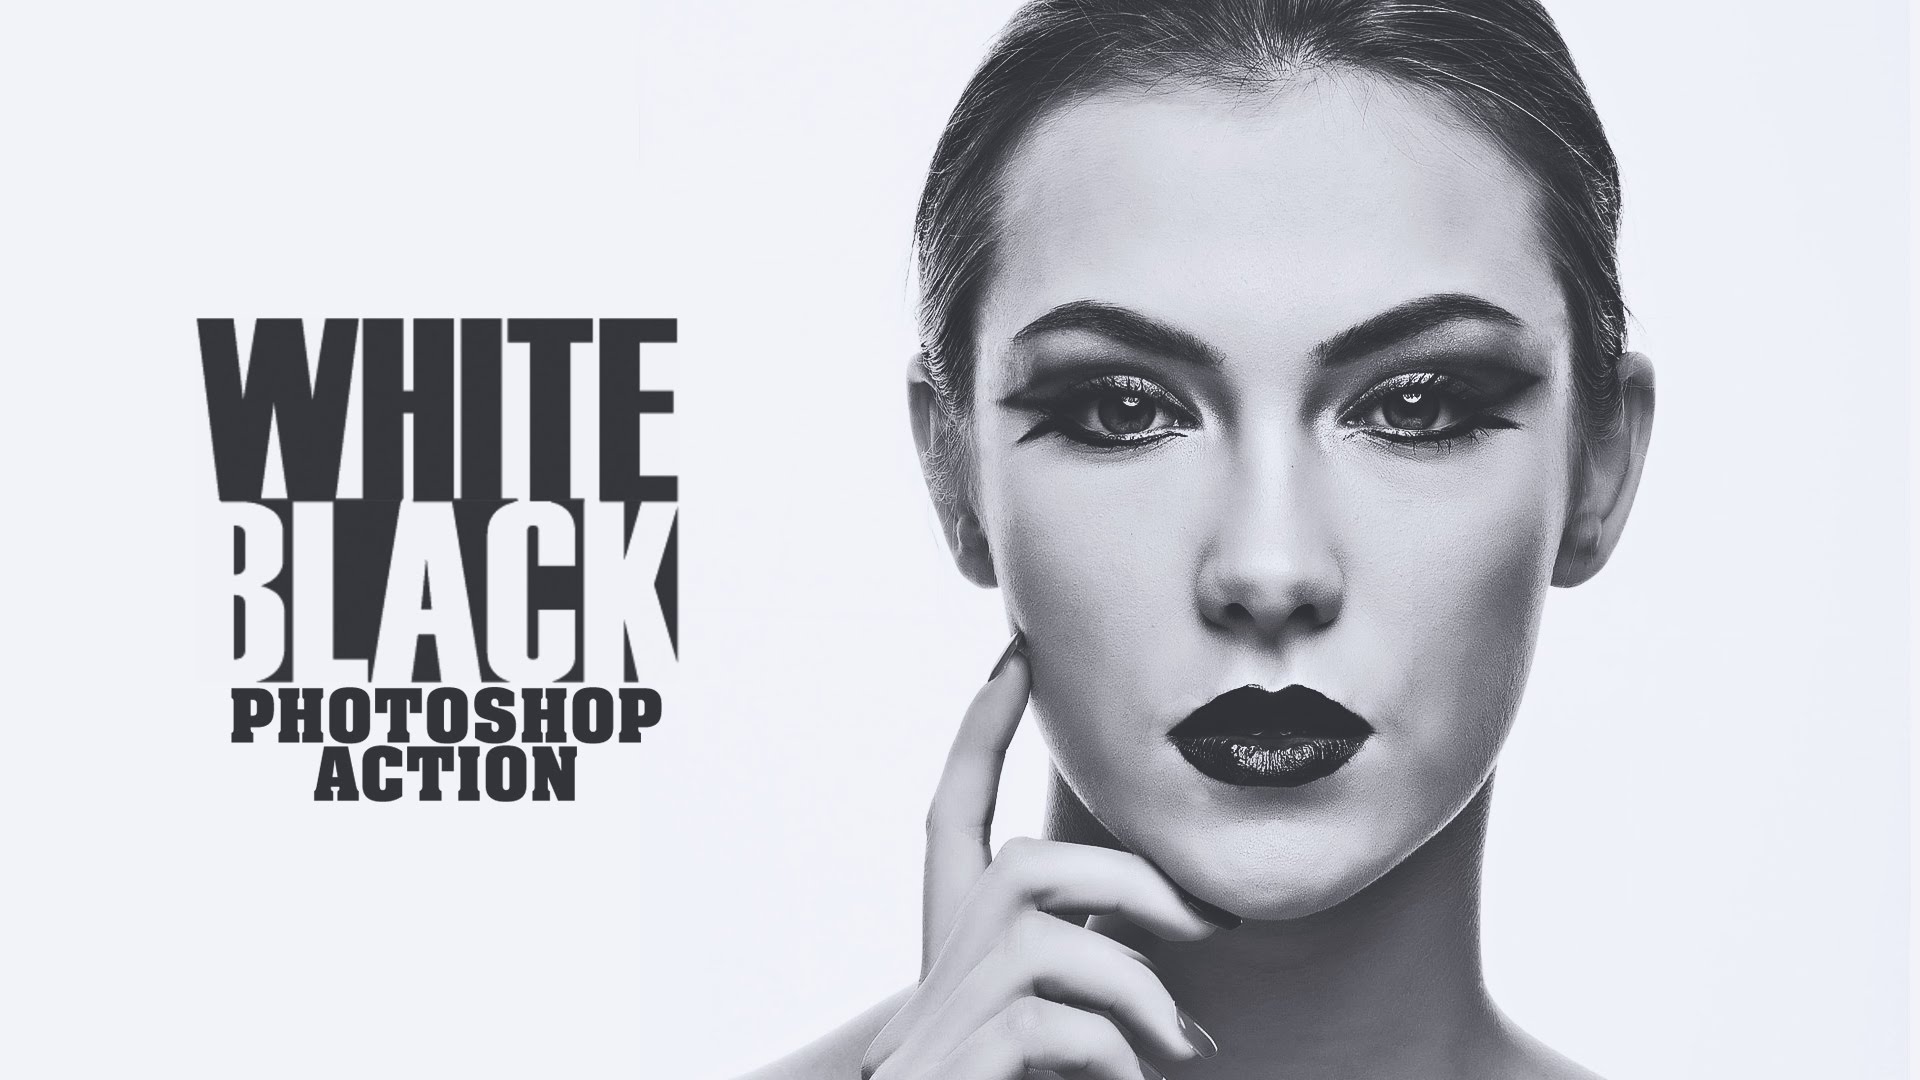 black and white action photoshop download